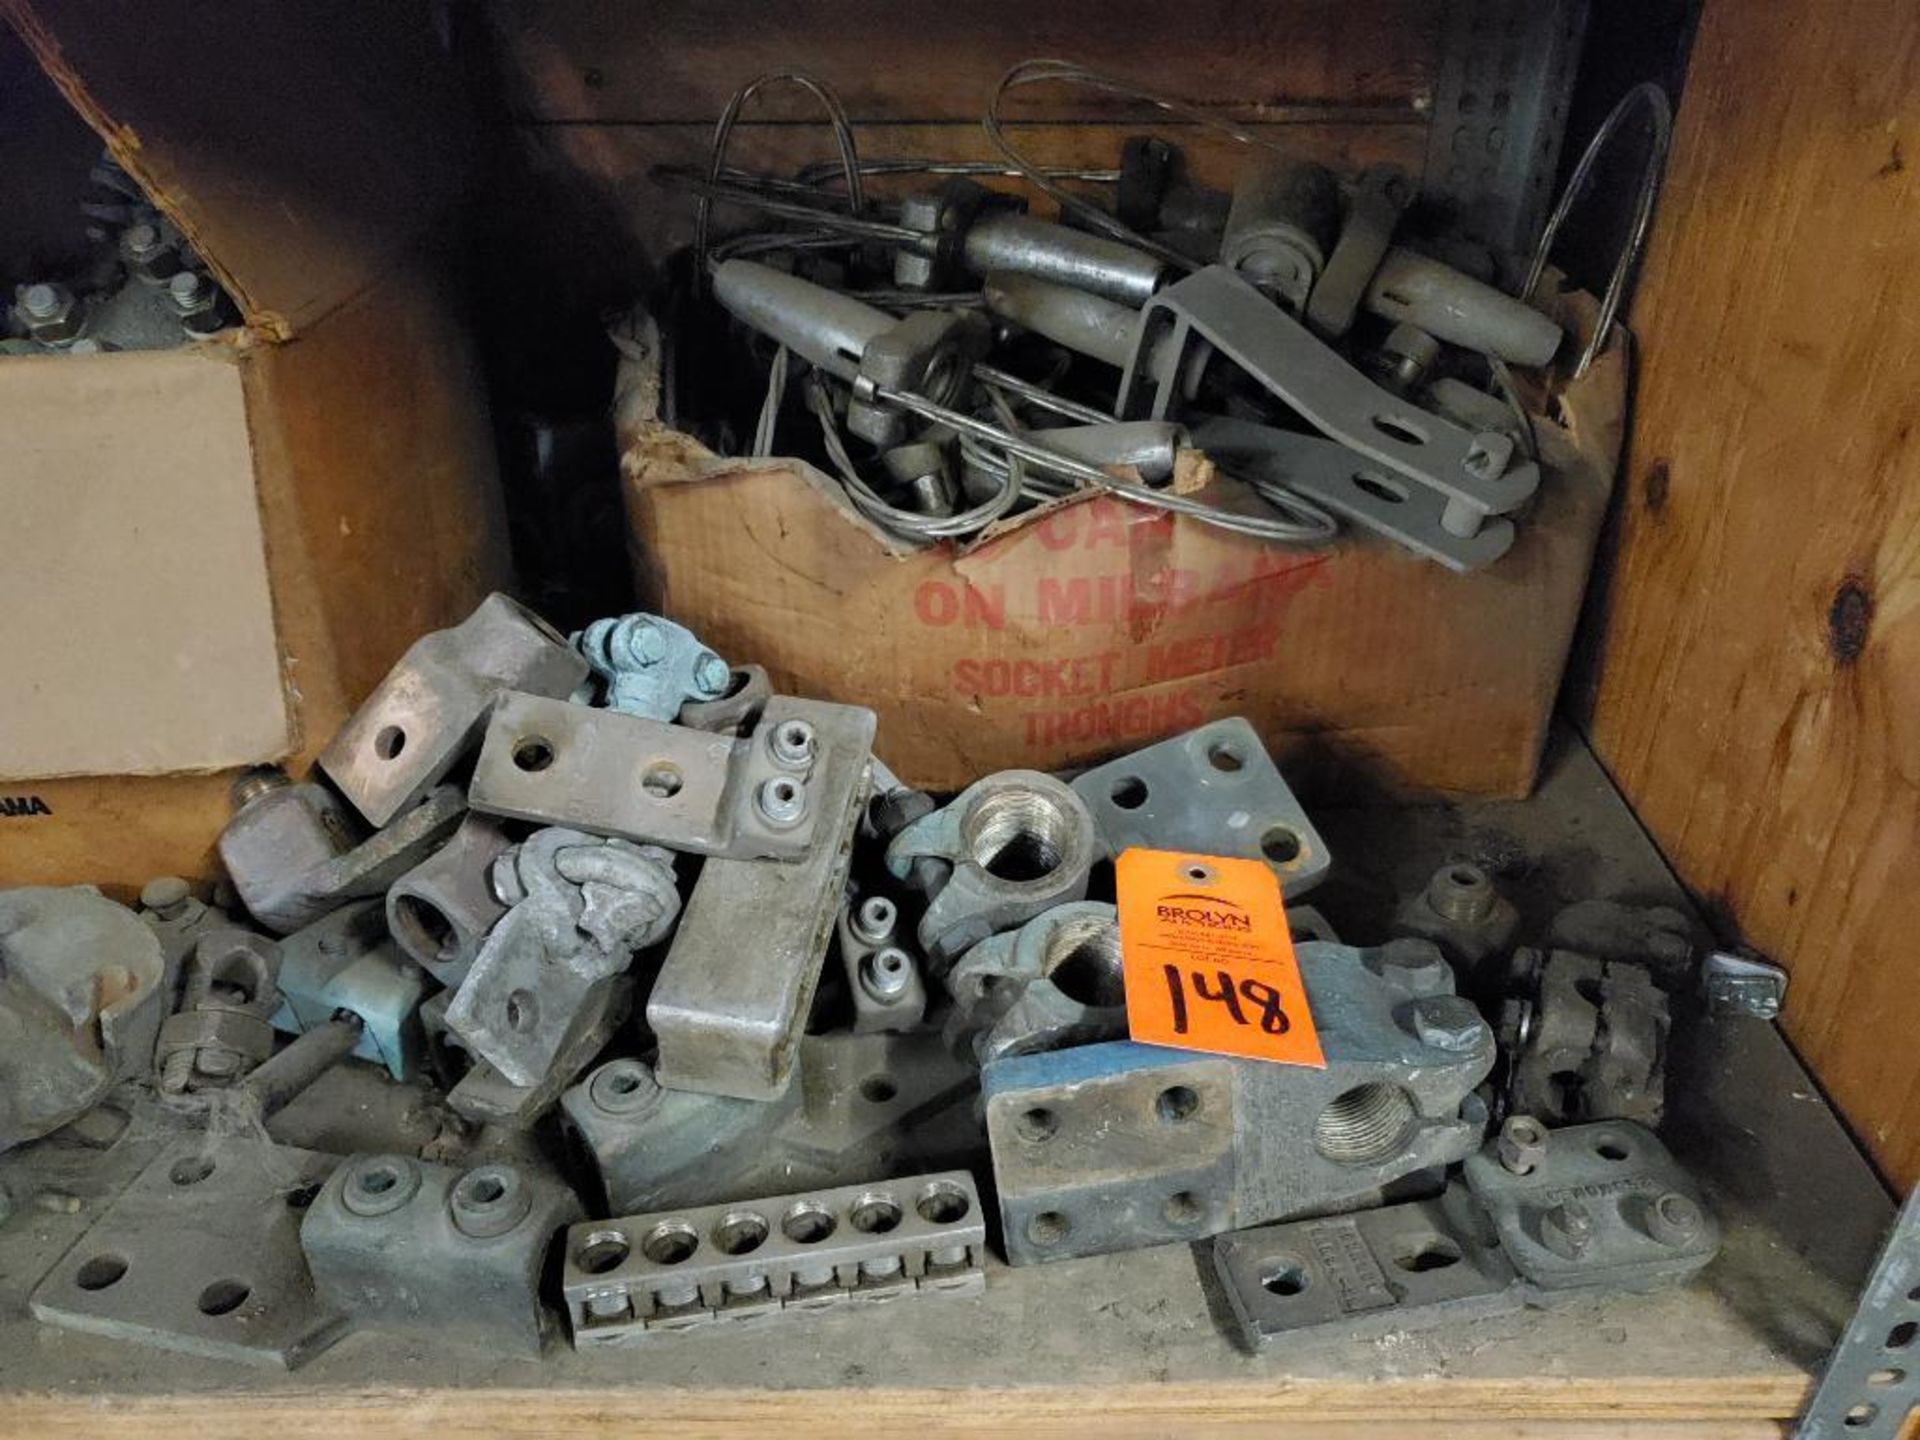 Contents of one shelf cubby - Large assortment of electrical lugs, fittings, and connectors. - Image 7 of 8